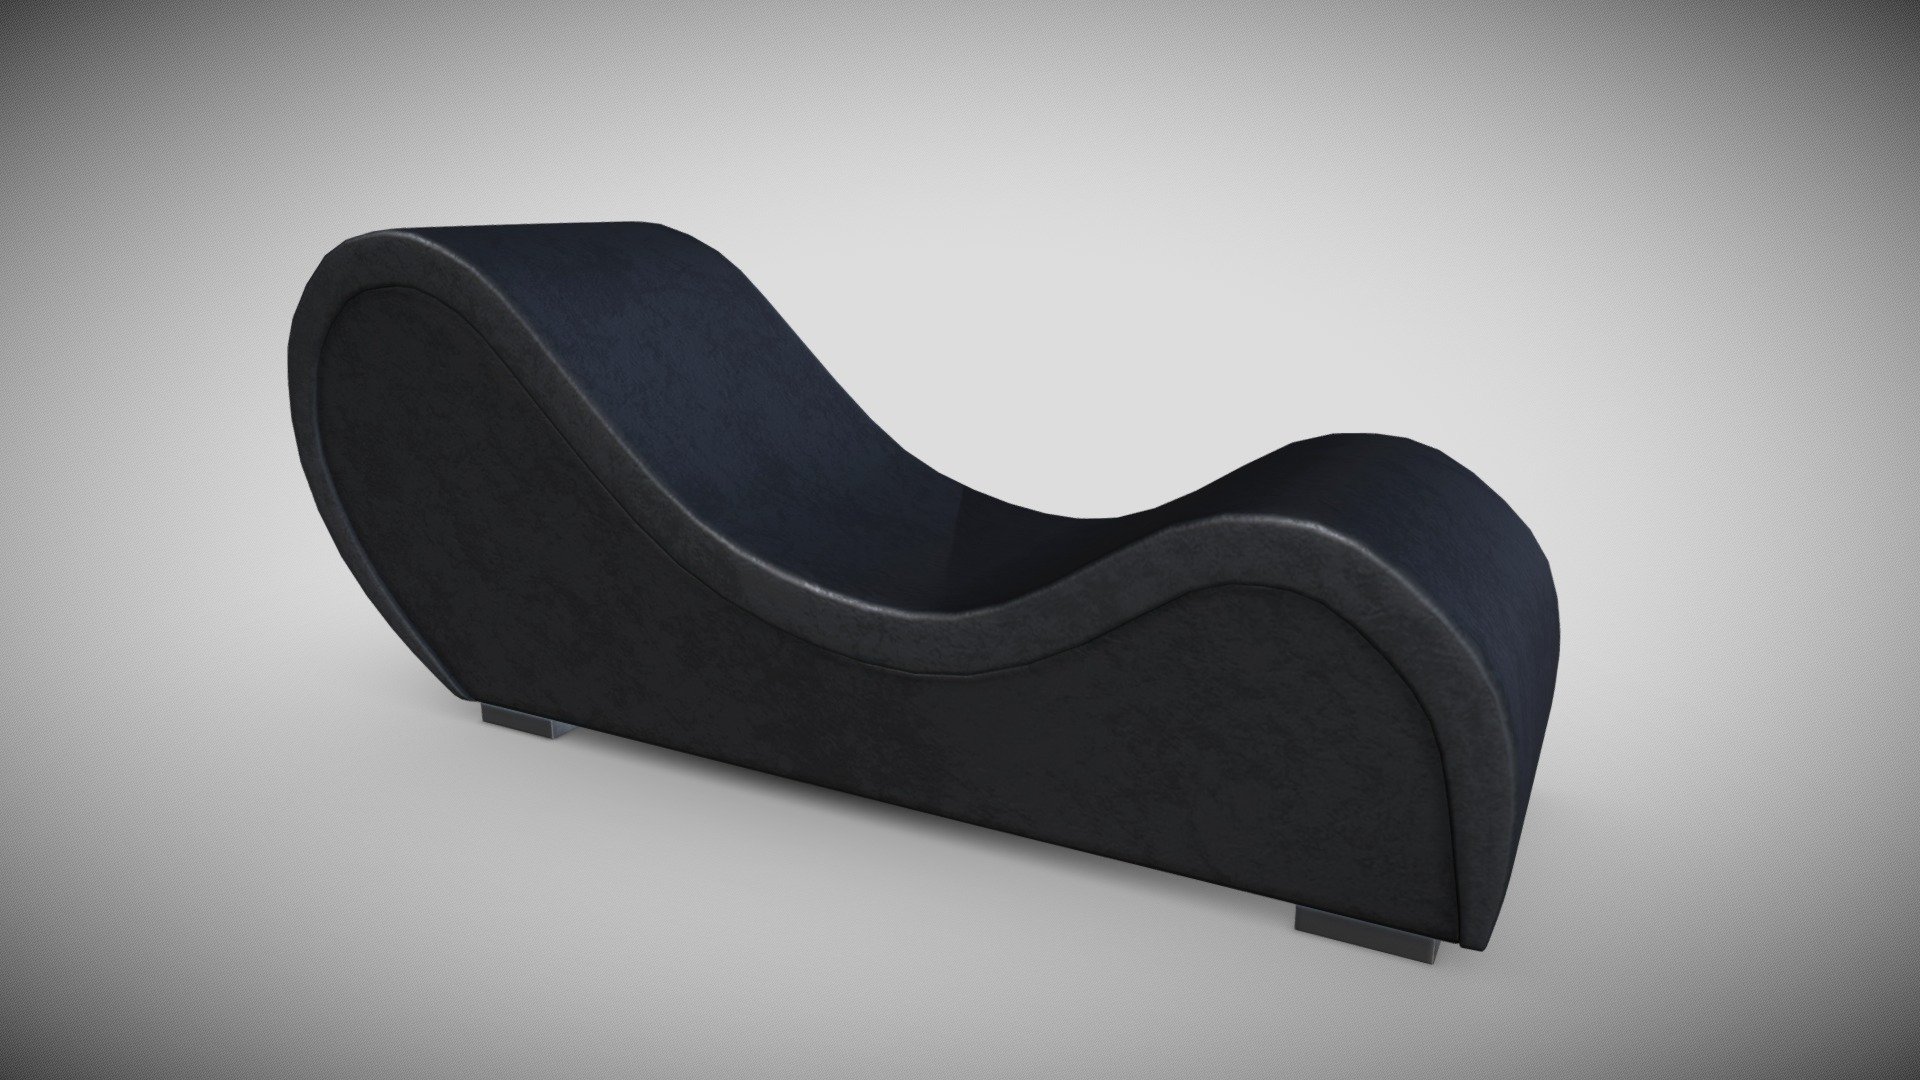 An item I did for Second Life
Modeling in Maya
Surfacing in Substance Painter - Tantra Chair - 3D model by Roxy3D 3d model